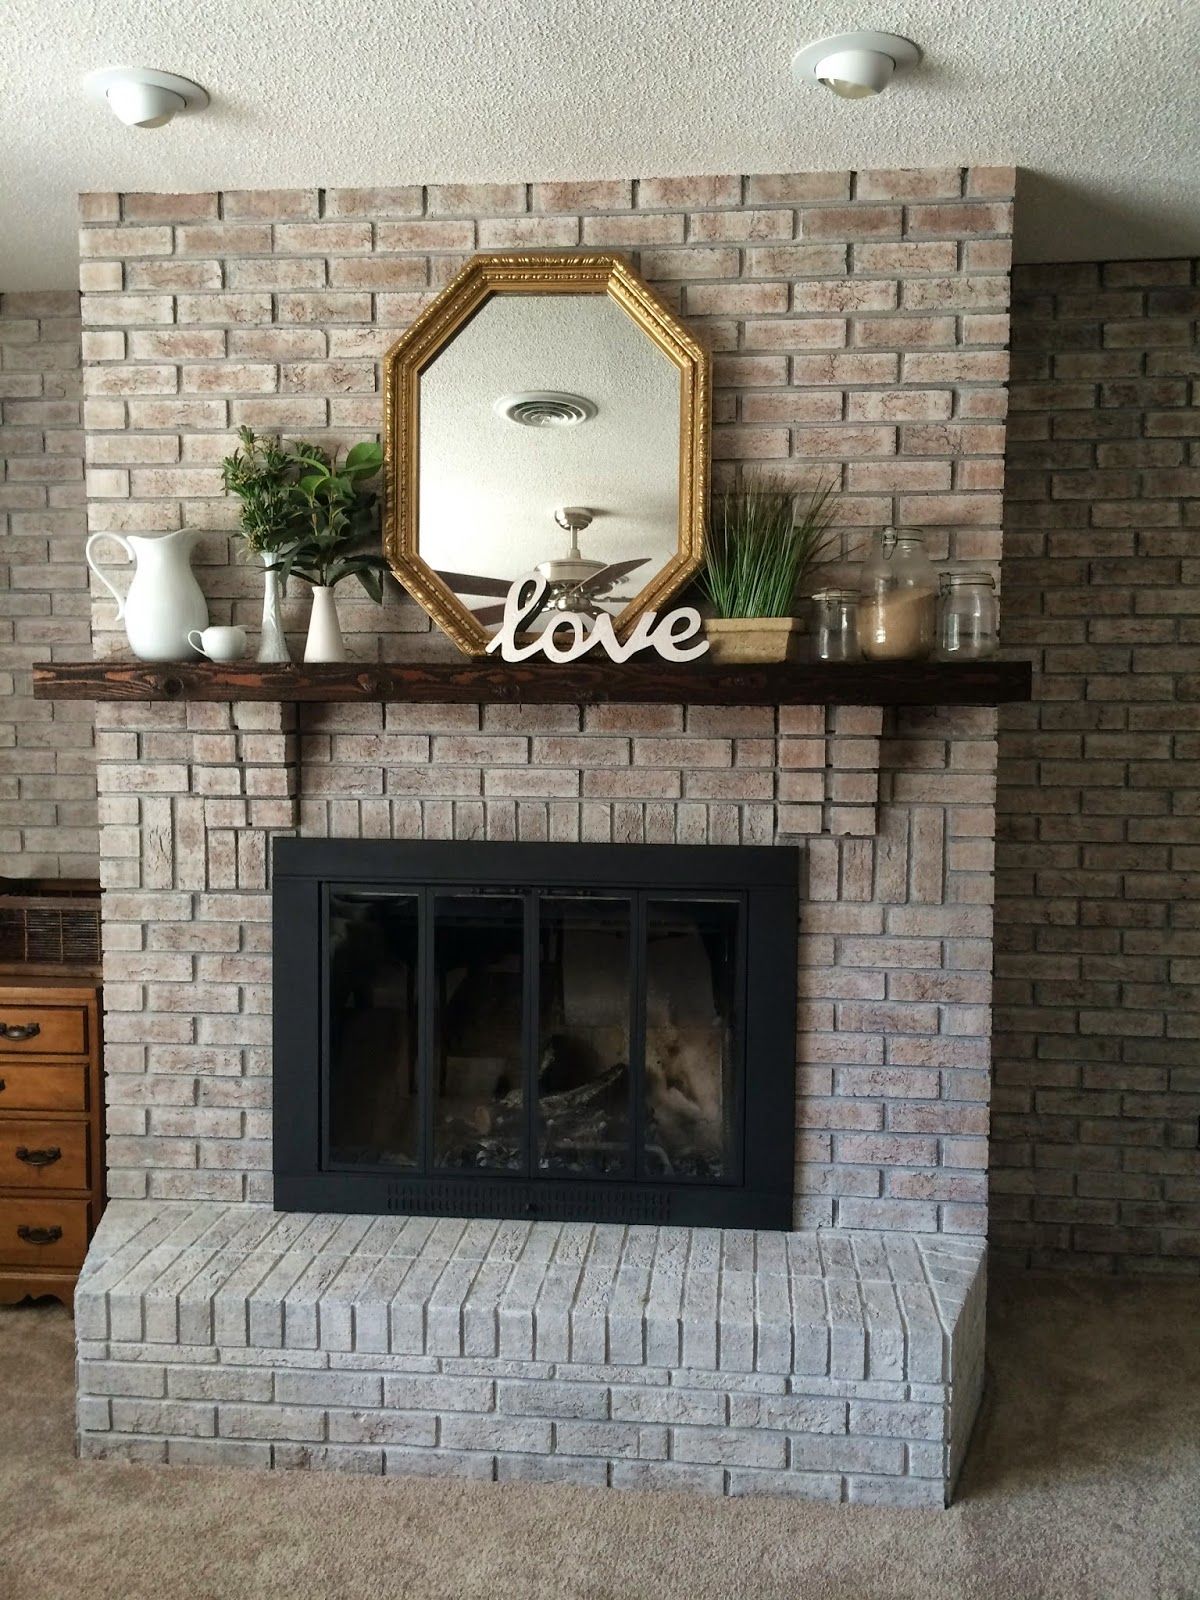 Bricks for Fireplace Best Of White Washing Brick with Gray Beige Walking with Dancers